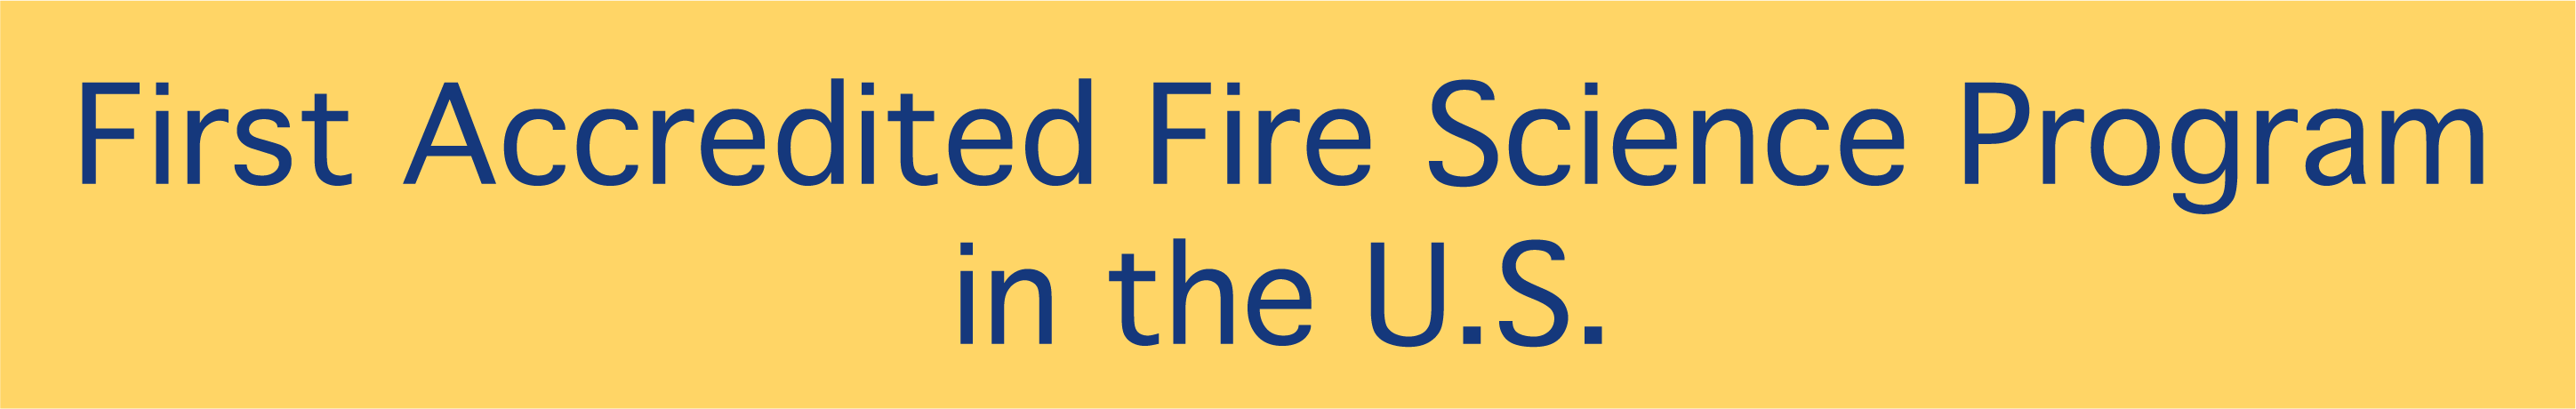 First Accredited Fire Science Program in the U.S.